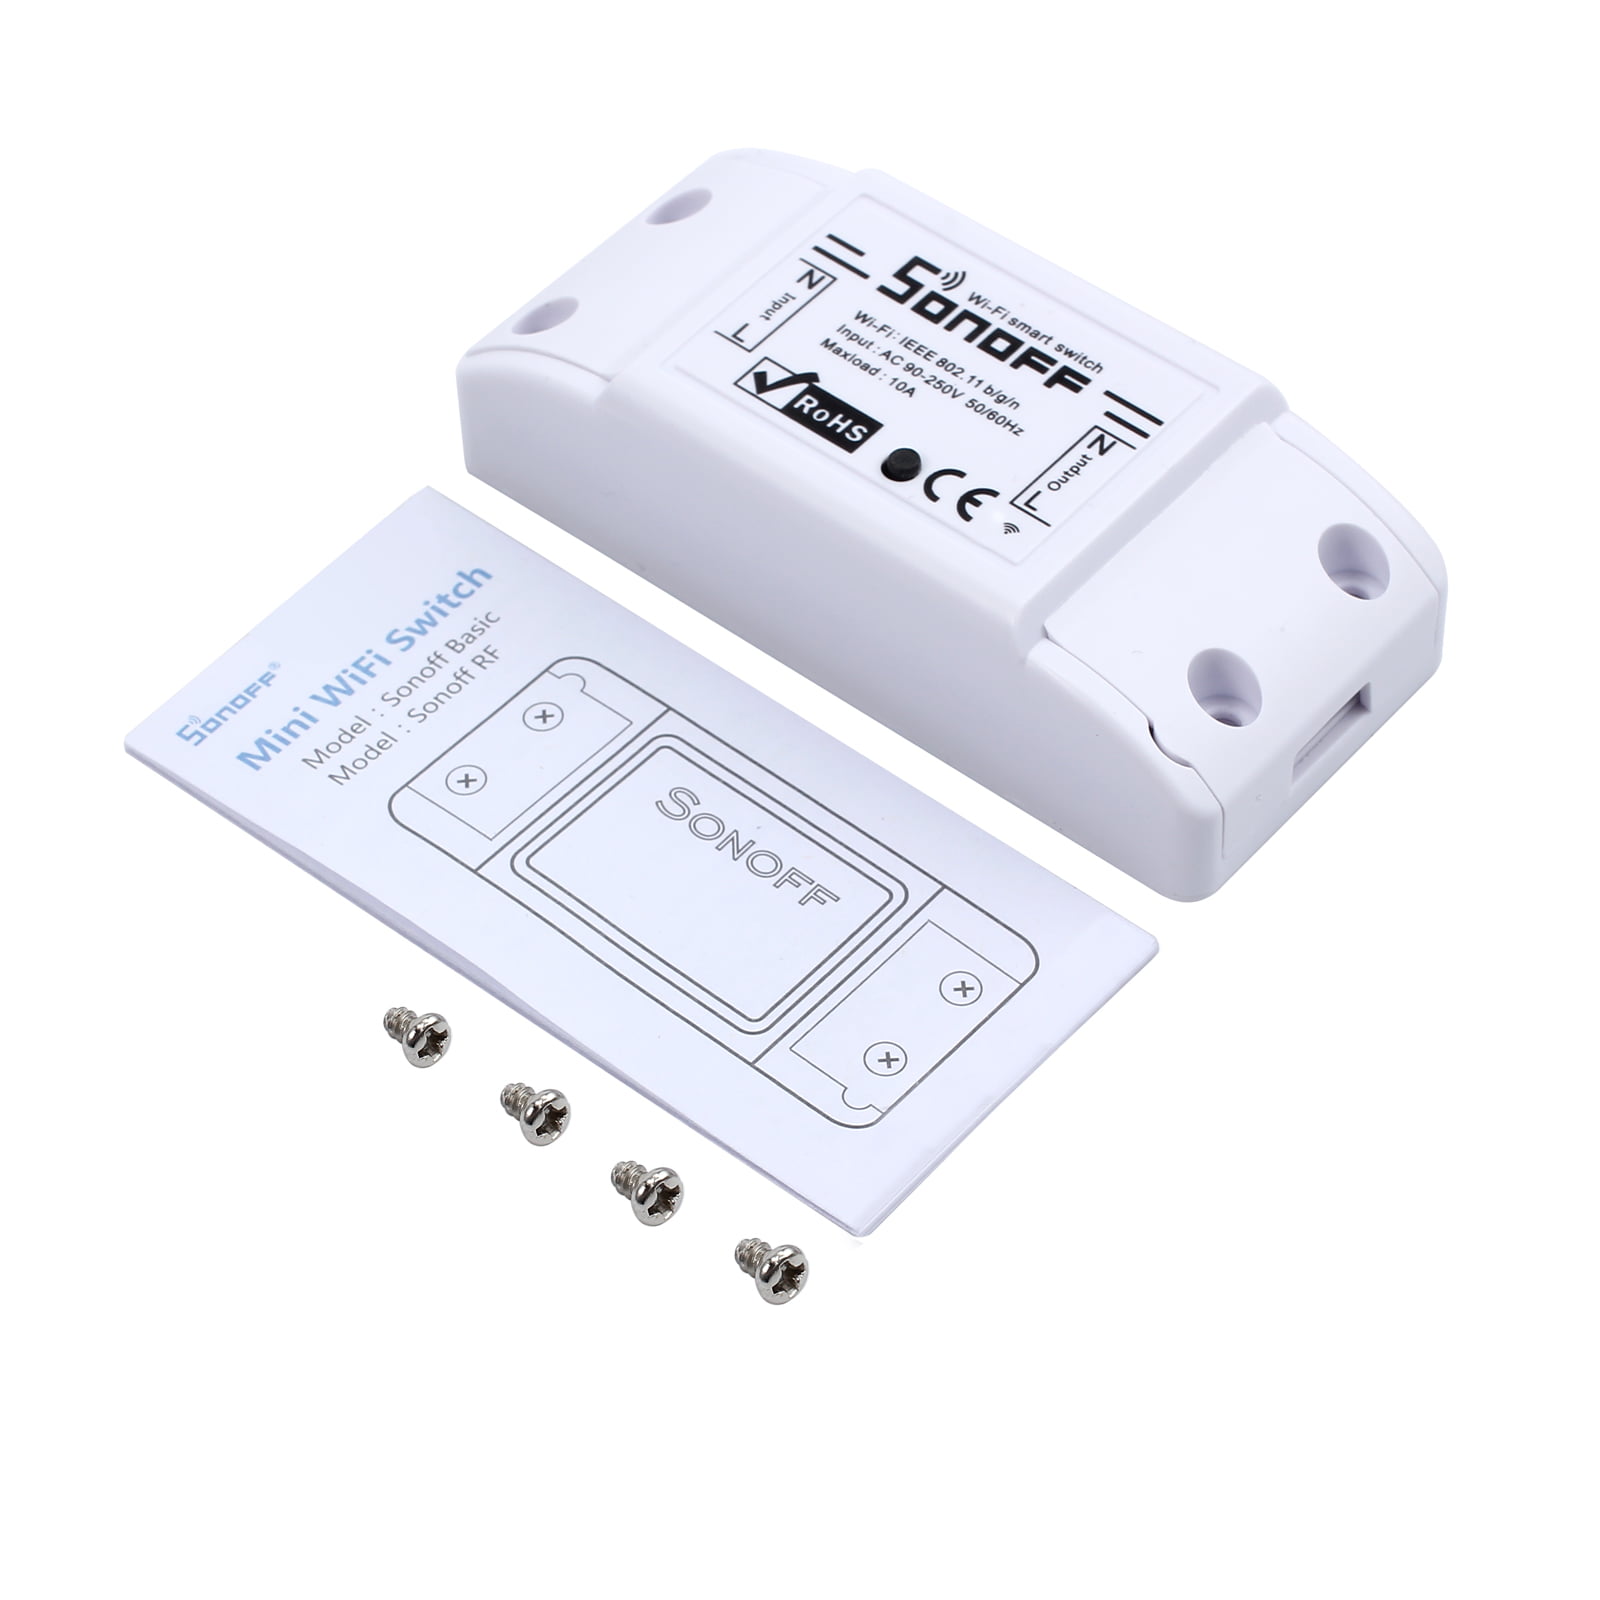 2//5X Sonoff WiFi Smart Switch Timer IOS//Android APP Fernbedienung Home Steckdose